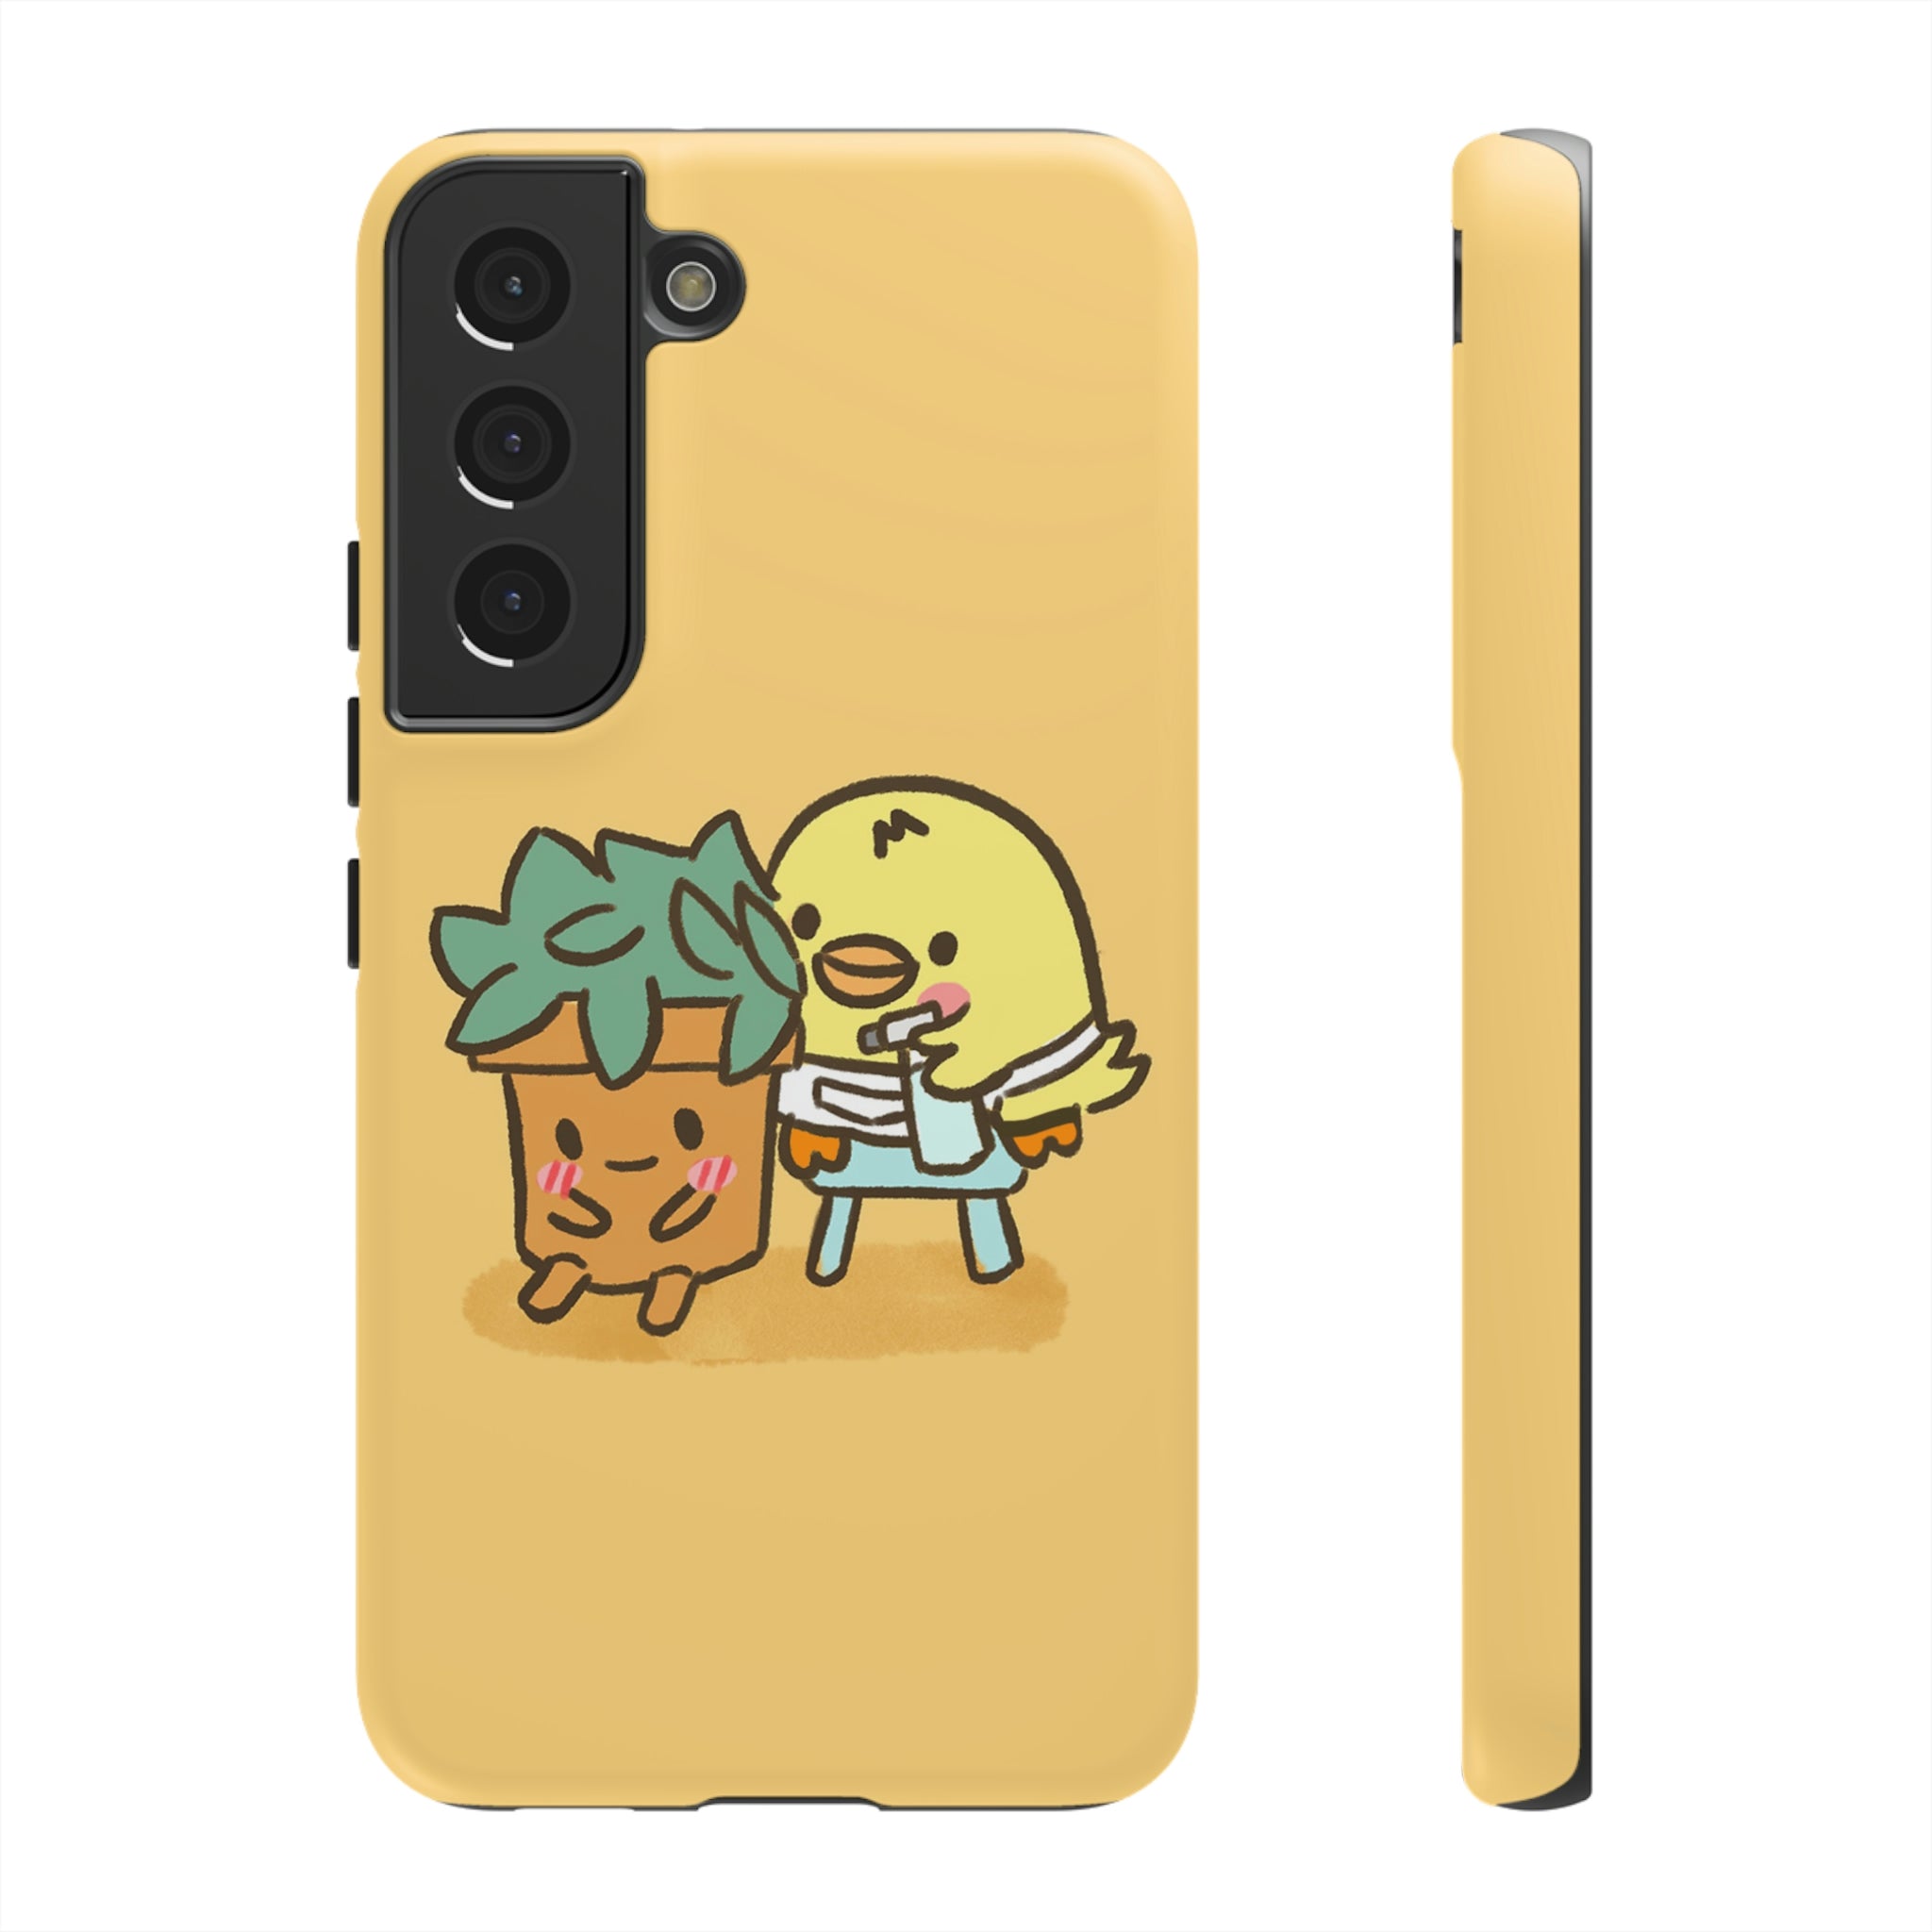 Taking Care of Each Other Samsung/Google Phone Case